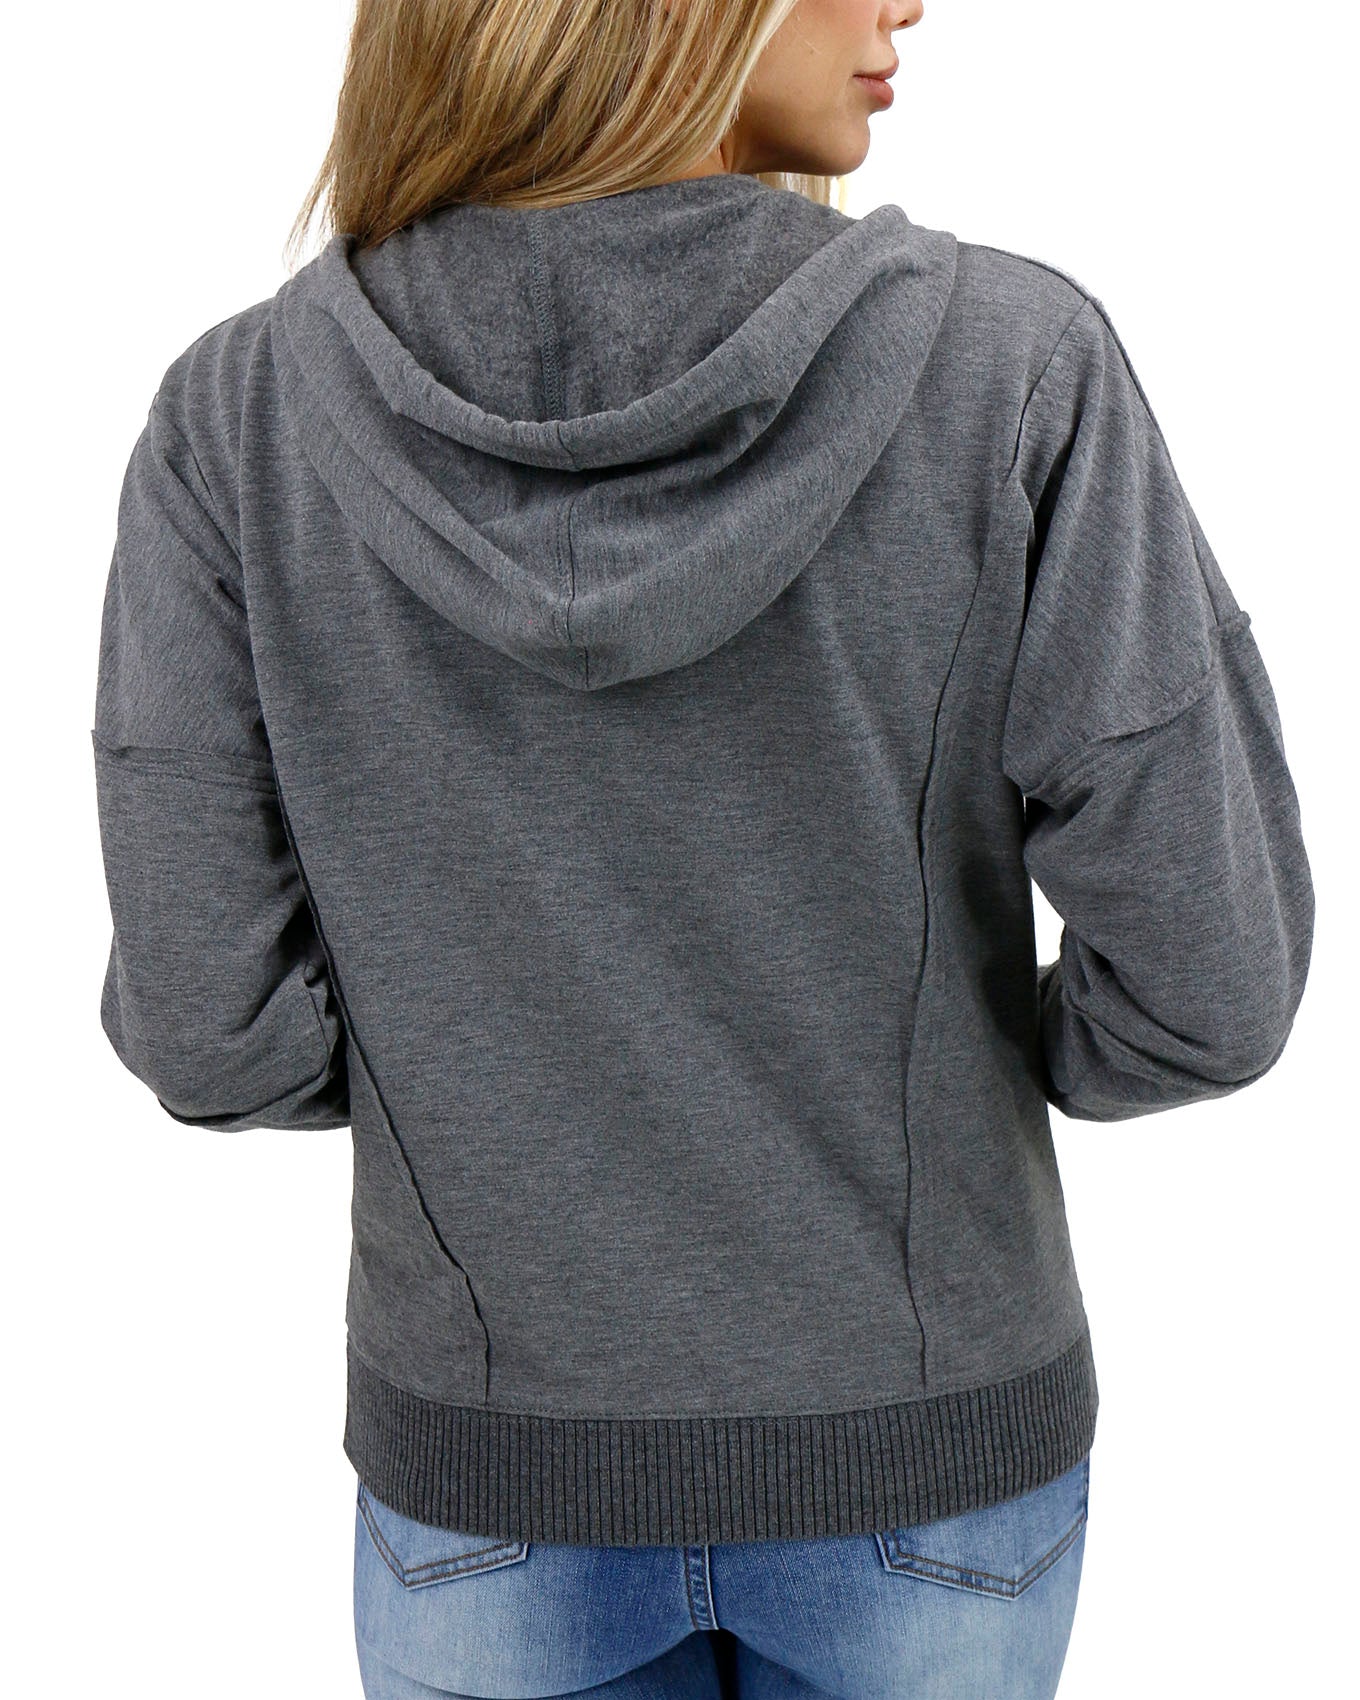 Signature Soft Heathered Charcoal Zip Up Hoodie - Grace and Lace